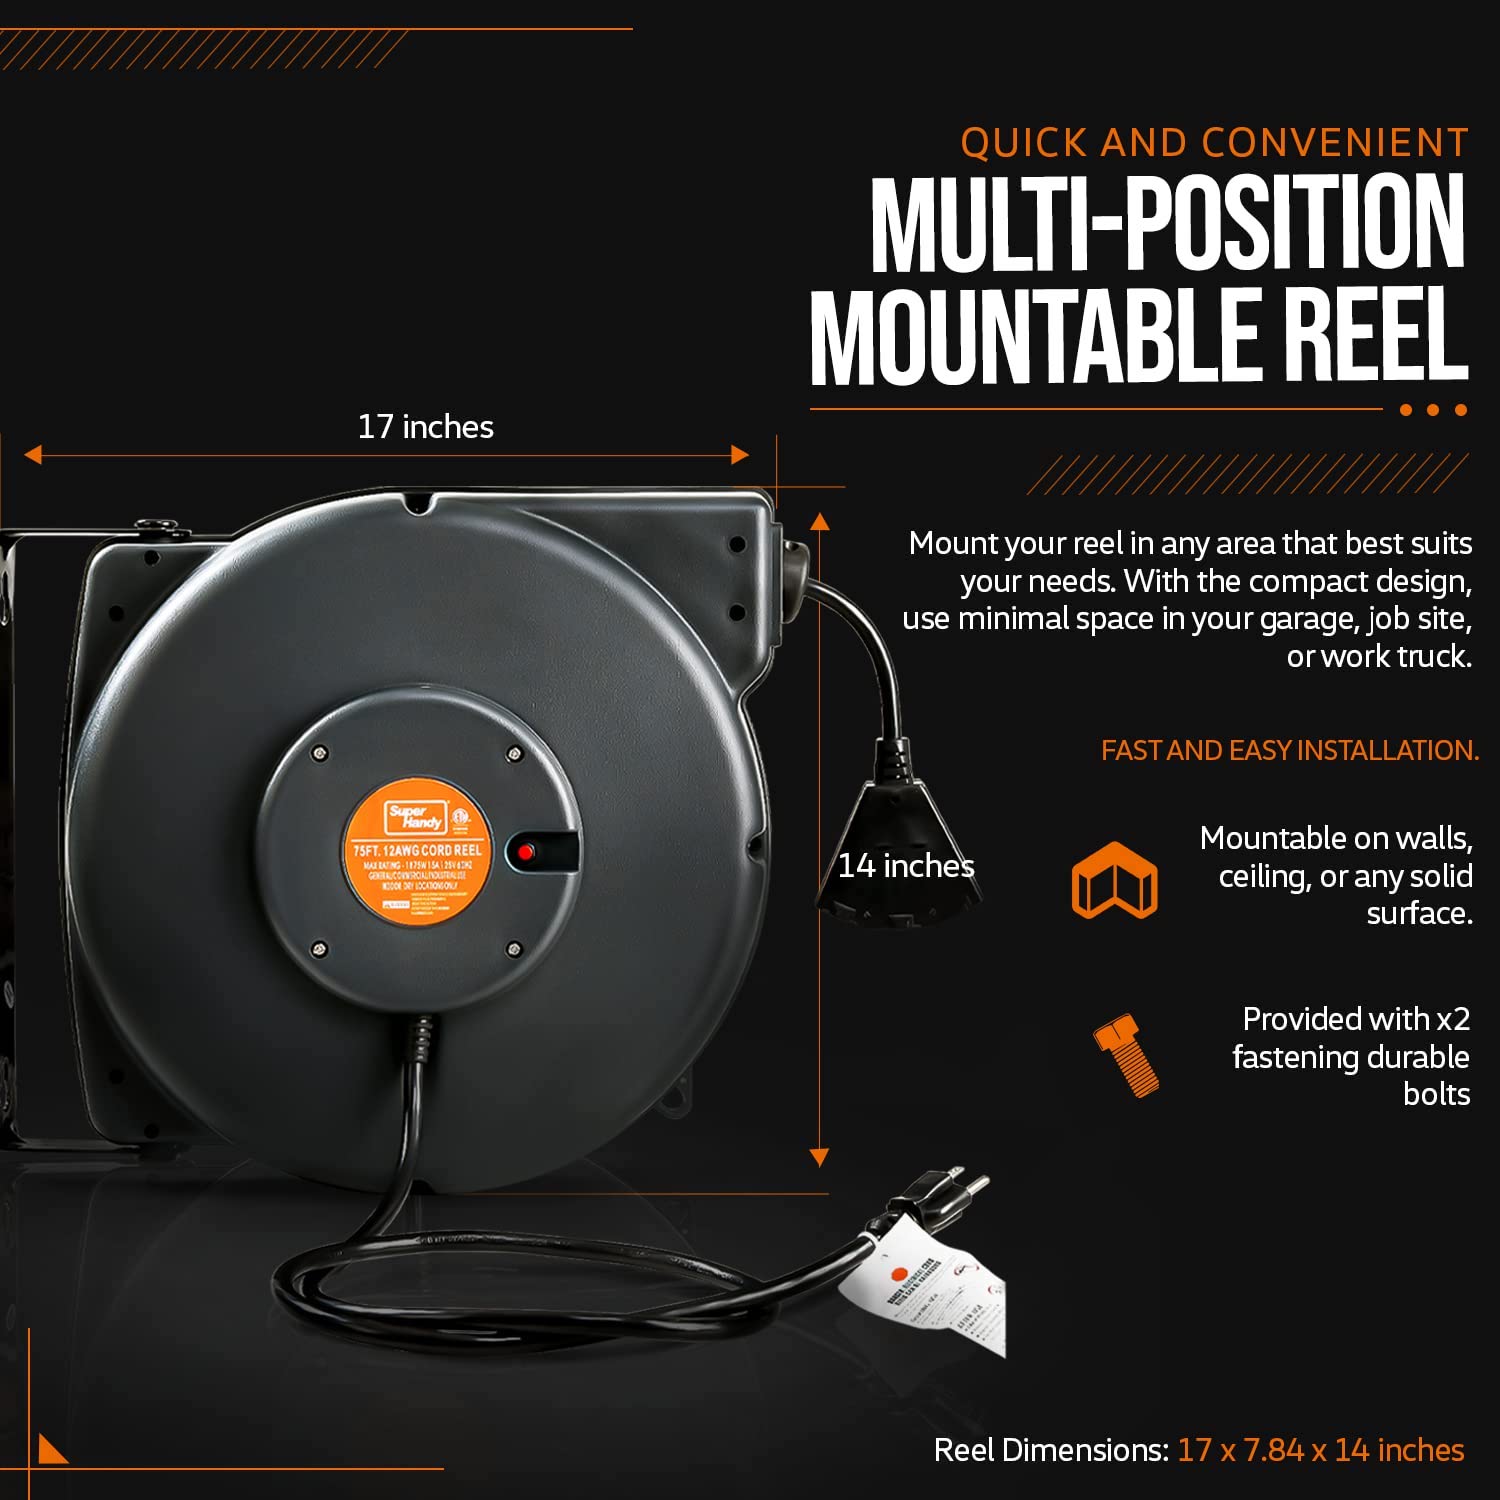 SuperHandy Mountable Retractable Extension Cord Reel - 12AWG x 65' ft, 3 Grounded Outlets, Max 15A